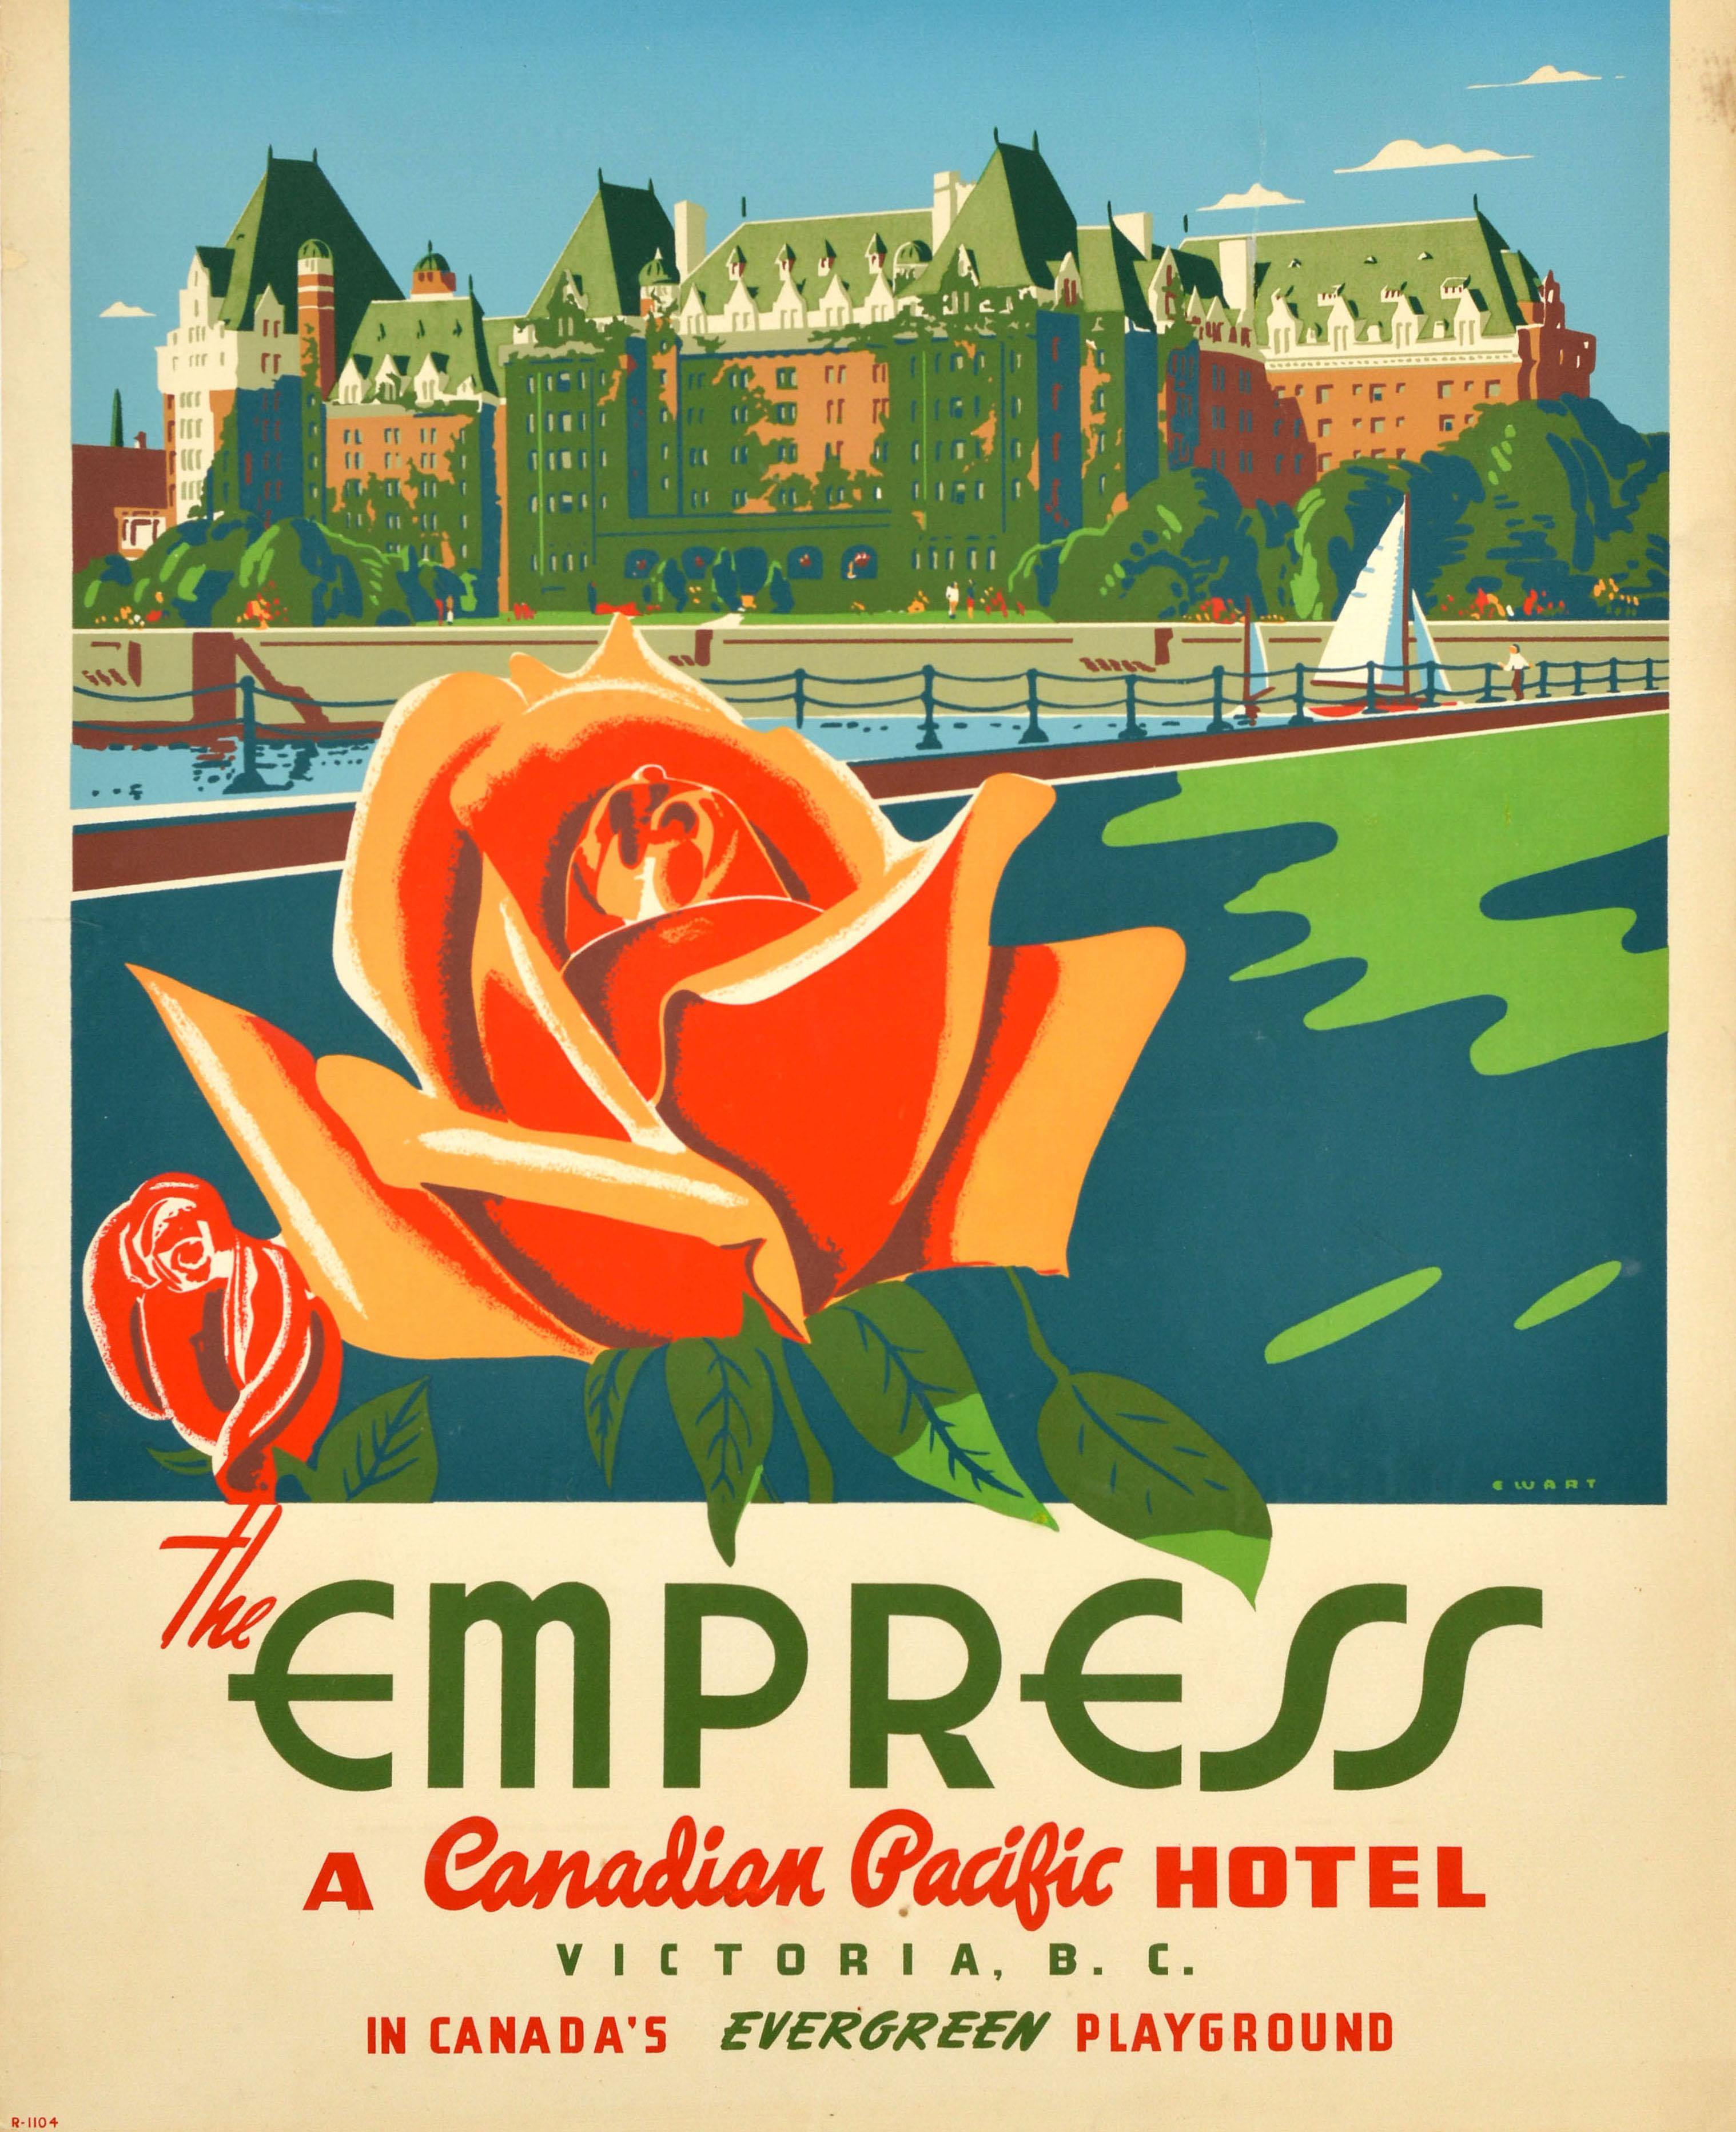 Original vintage travel advertising poster for The Empress A Canadian Pacific Hotel Victoria B.C. In Canada's Evergreen Playground featuring colourful artwork by the Canadian artist Peter Maxwell Ewart (1918-2001) showing a view of the historic